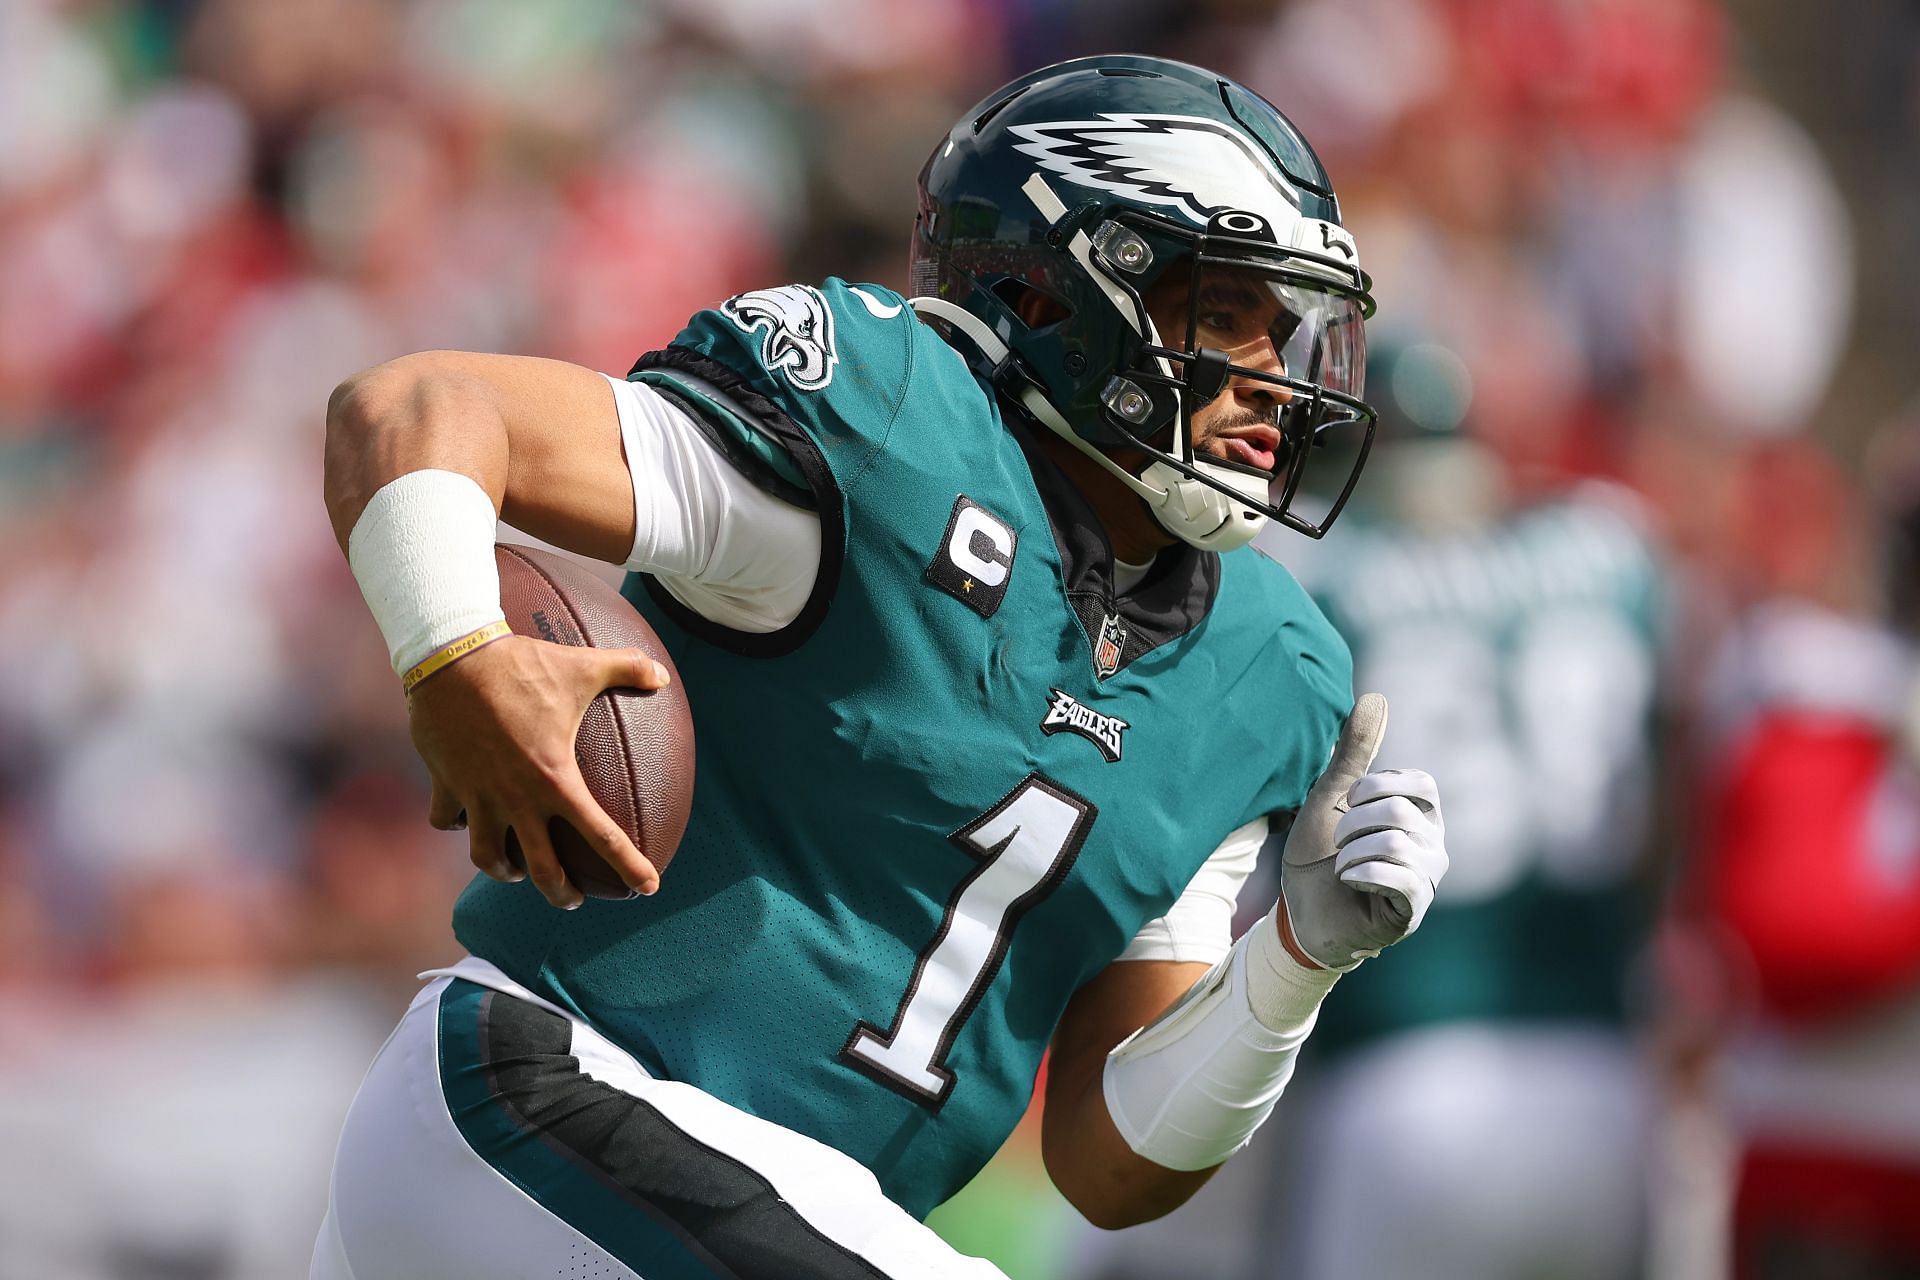 Jalen Hurts&#039; development will determine how difficult the 2022 NFL schedule will be to navigate for the Eagles